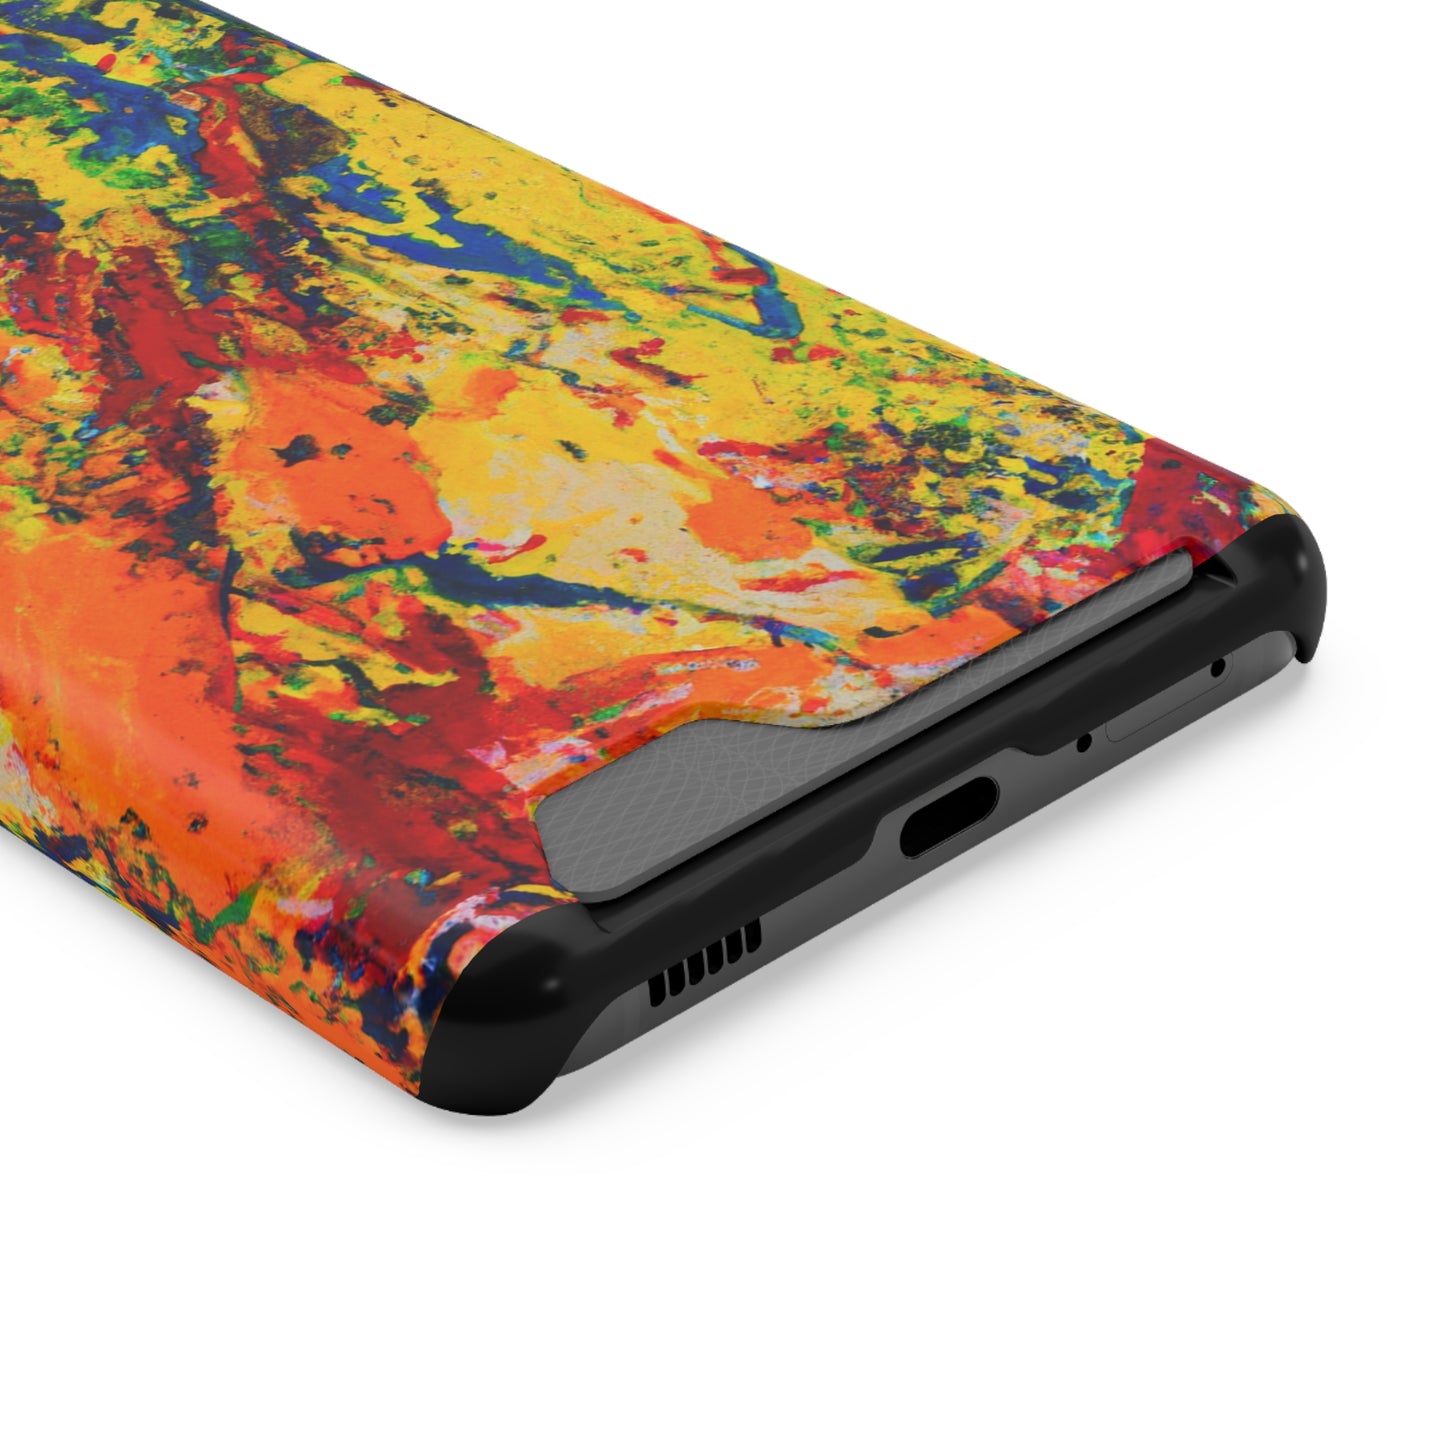 iPhone or Samsung Case with Card Holder Ft. Abstract Yellow Orange